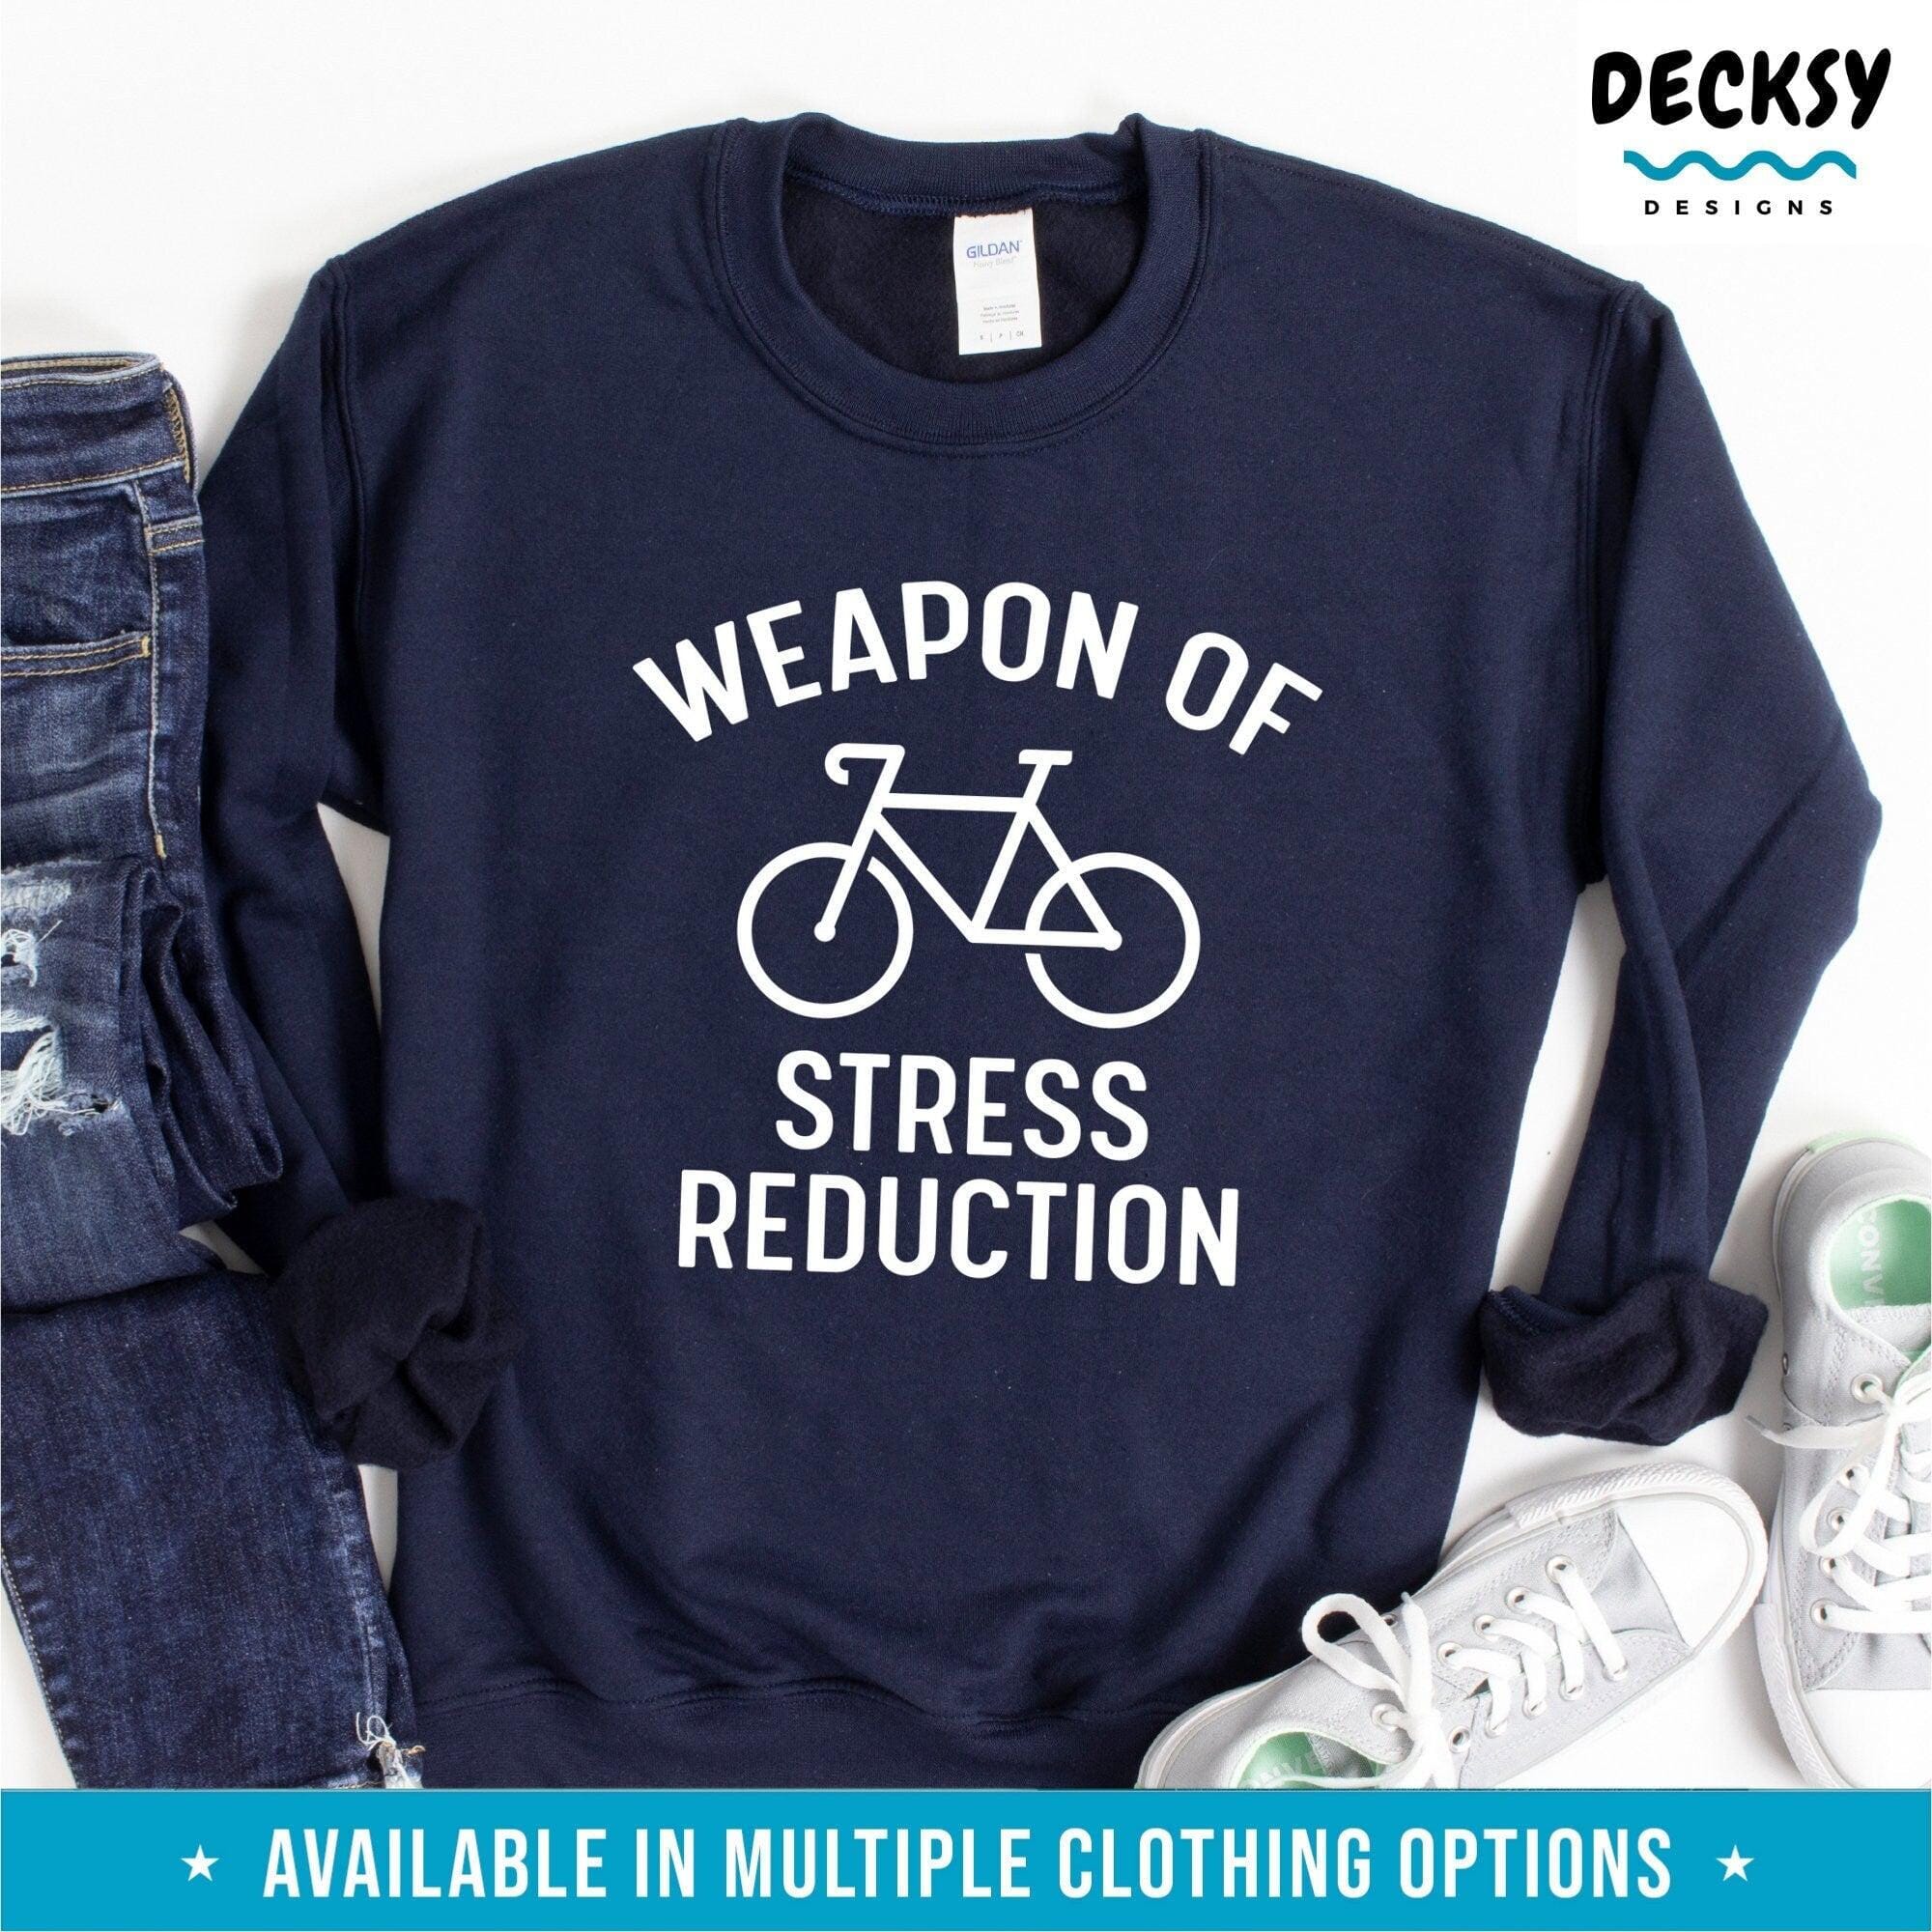 Cycling T-shirt, Gift For Cyclists-Clothing:Gender-Neutral Adult Clothing:Tops & Tees:T-shirts:Graphic Tees-DecksyDesigns